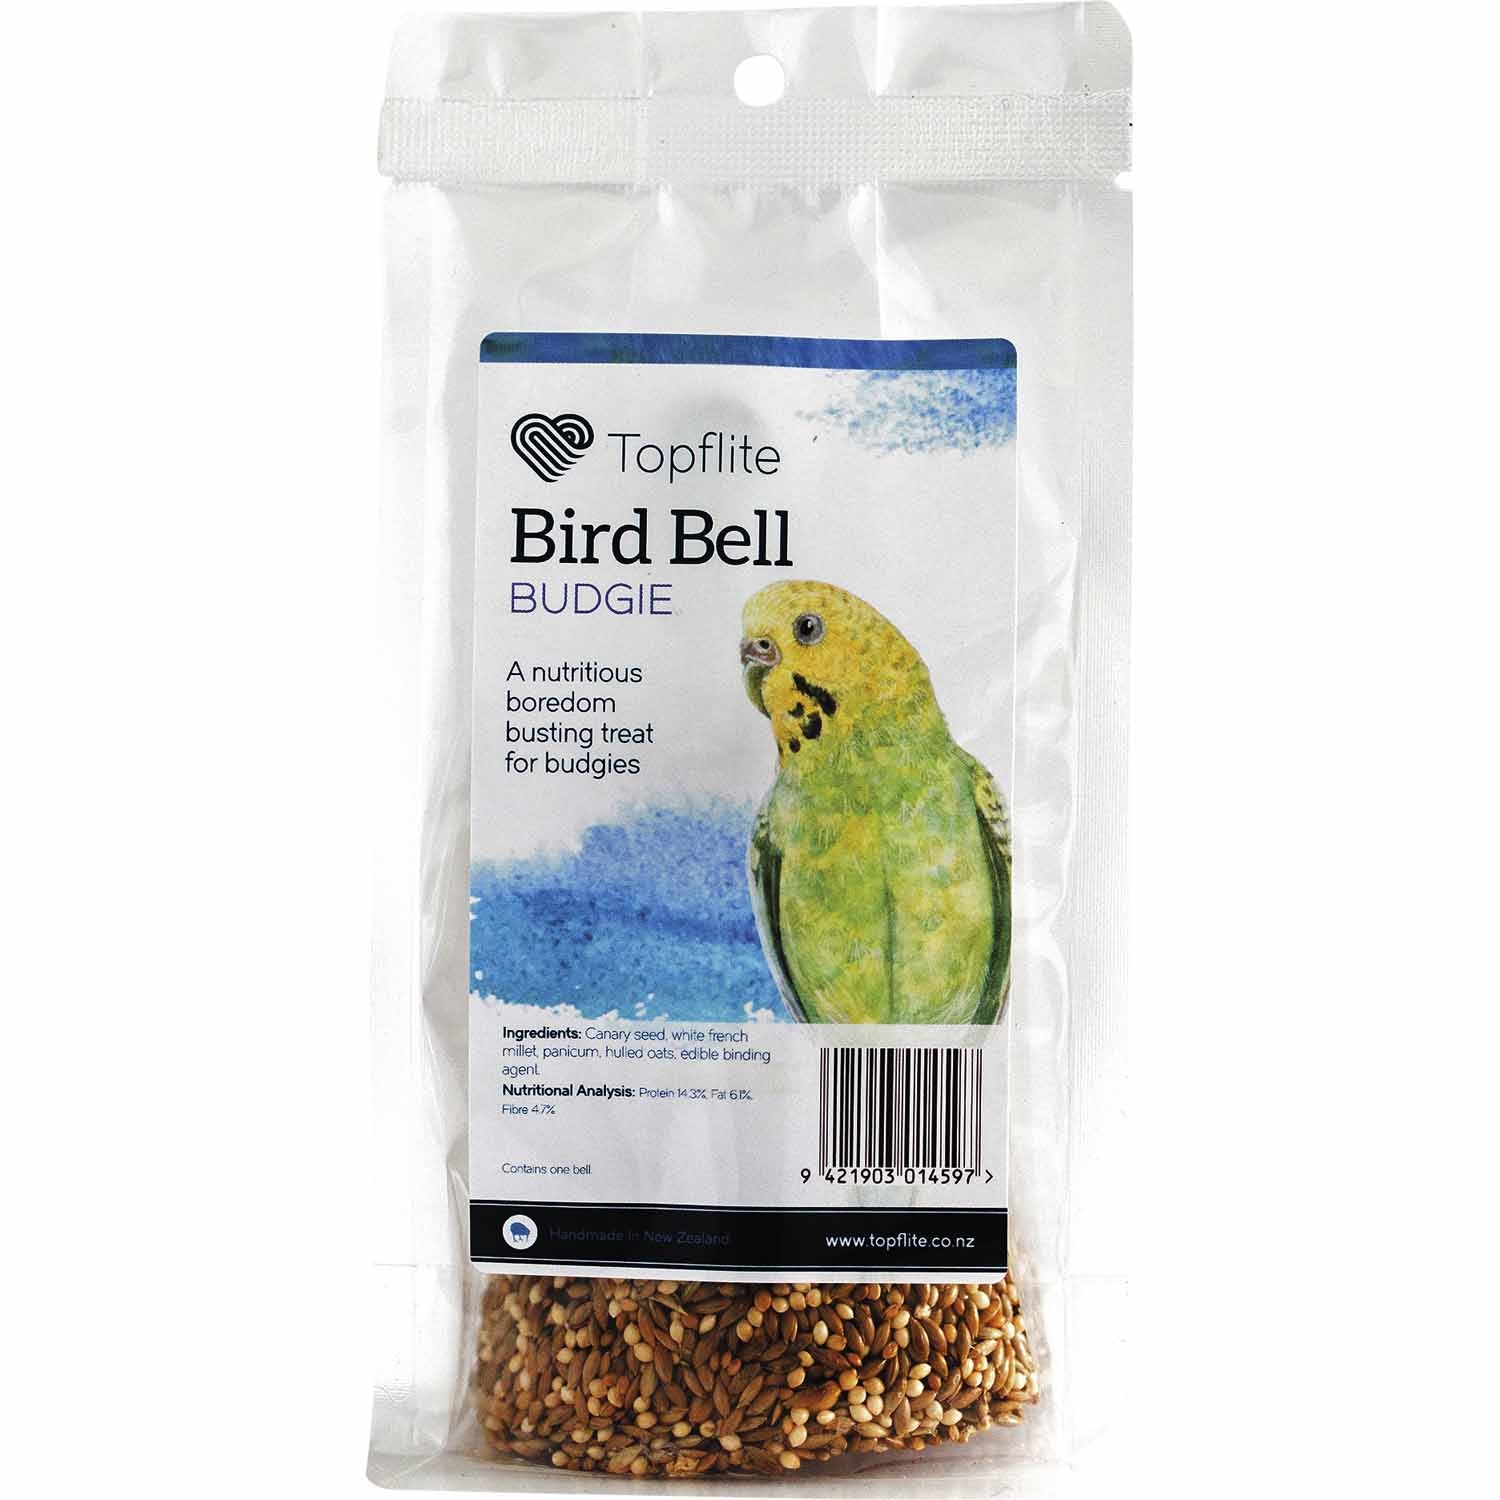 Topflite seed bells are highly nutritious treats that also provide enrichment